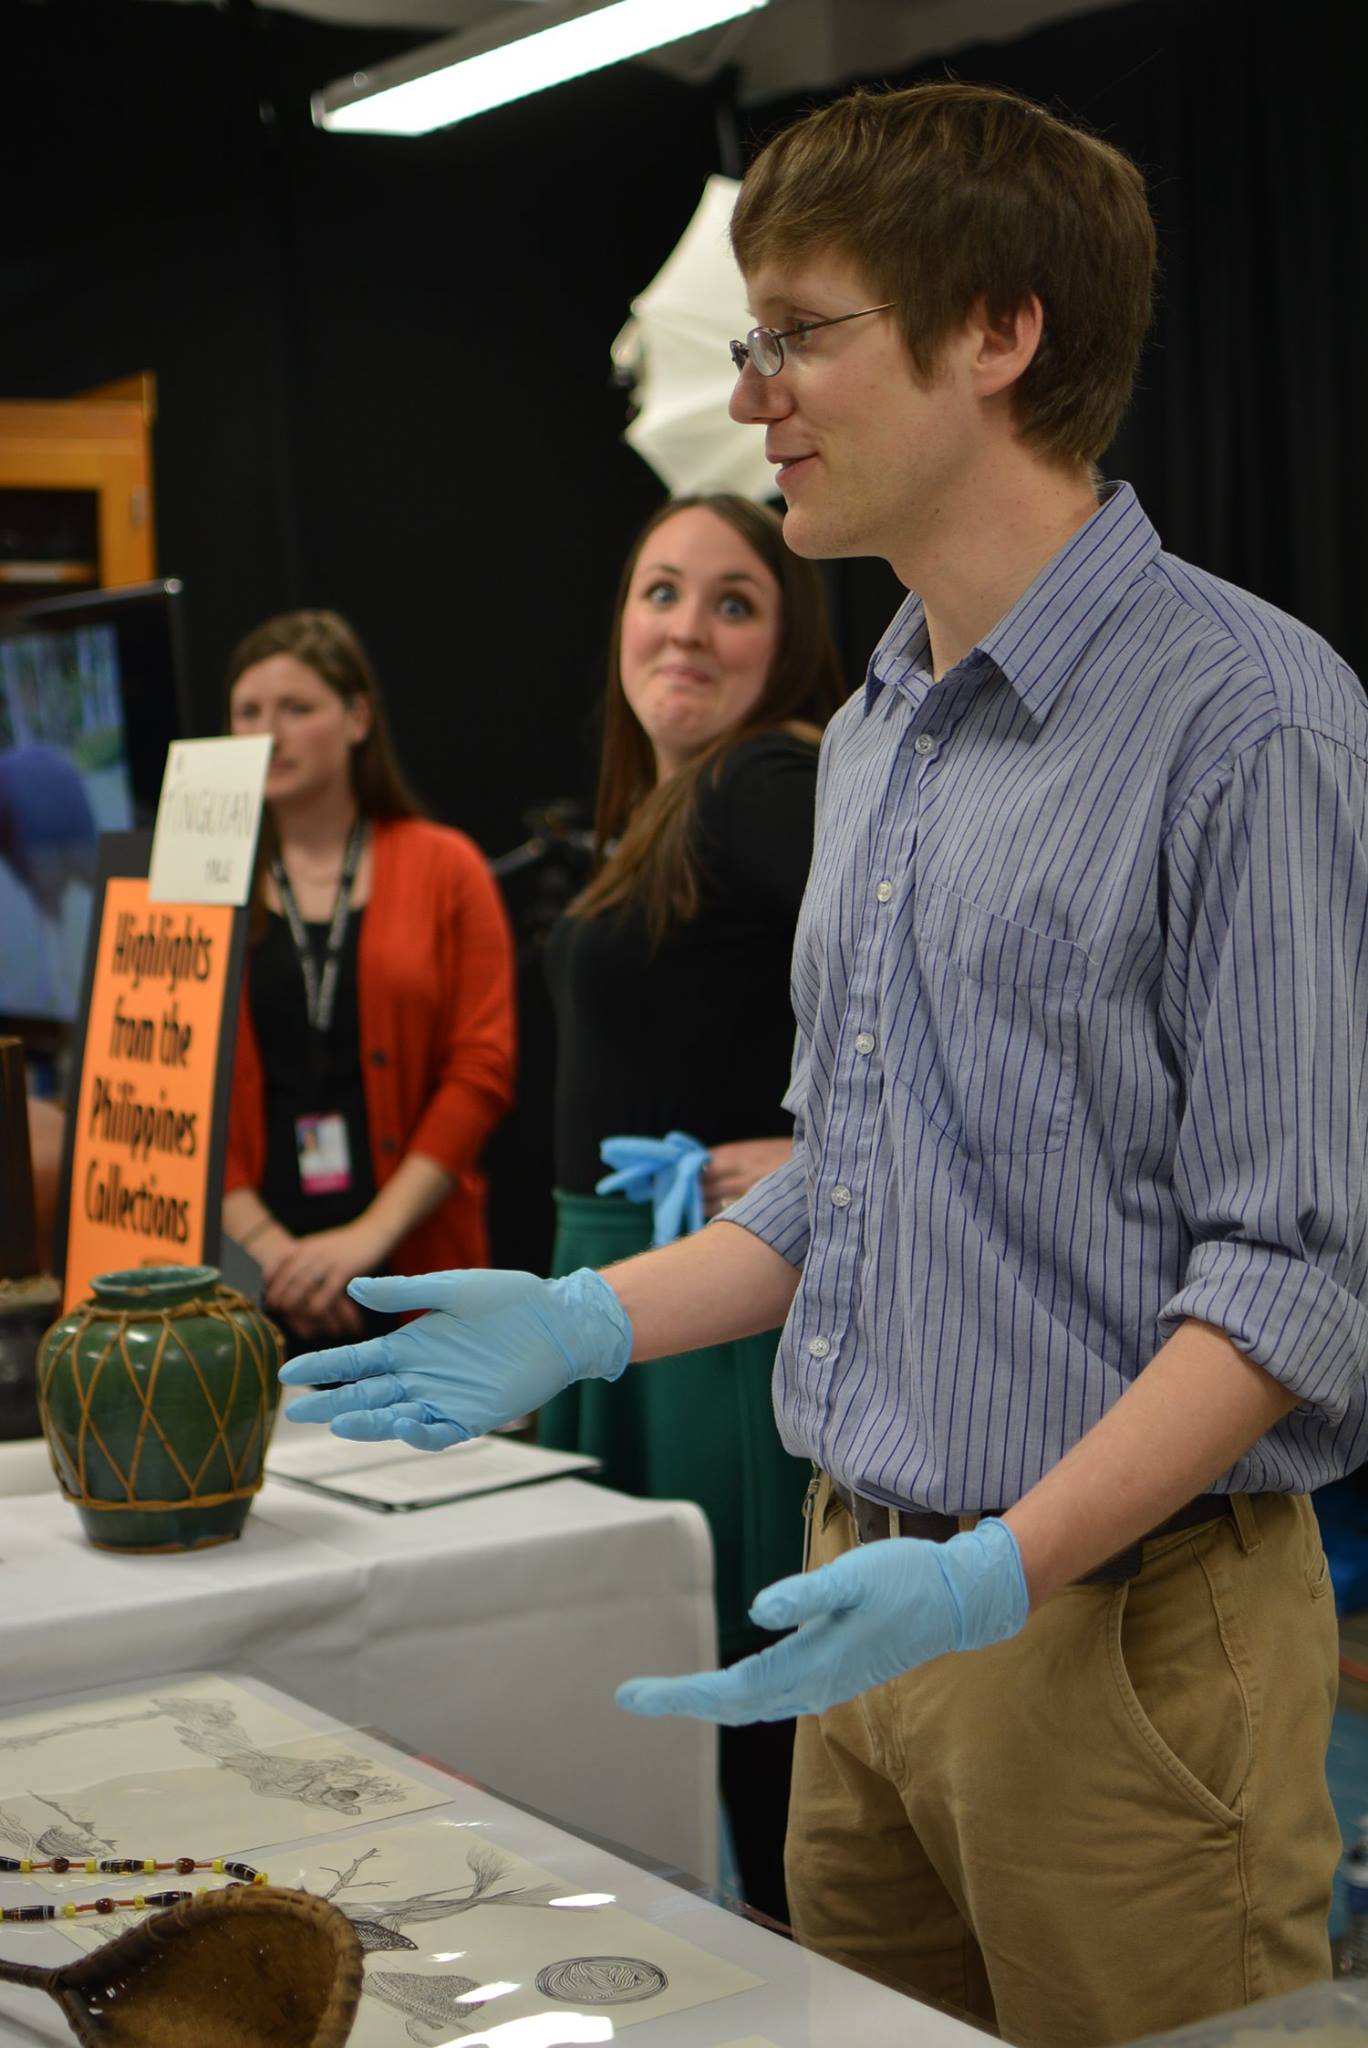 James answers a guest's question about the artifacts on display. (c) Field Museum of Natural History - CC BY-NC 4.0